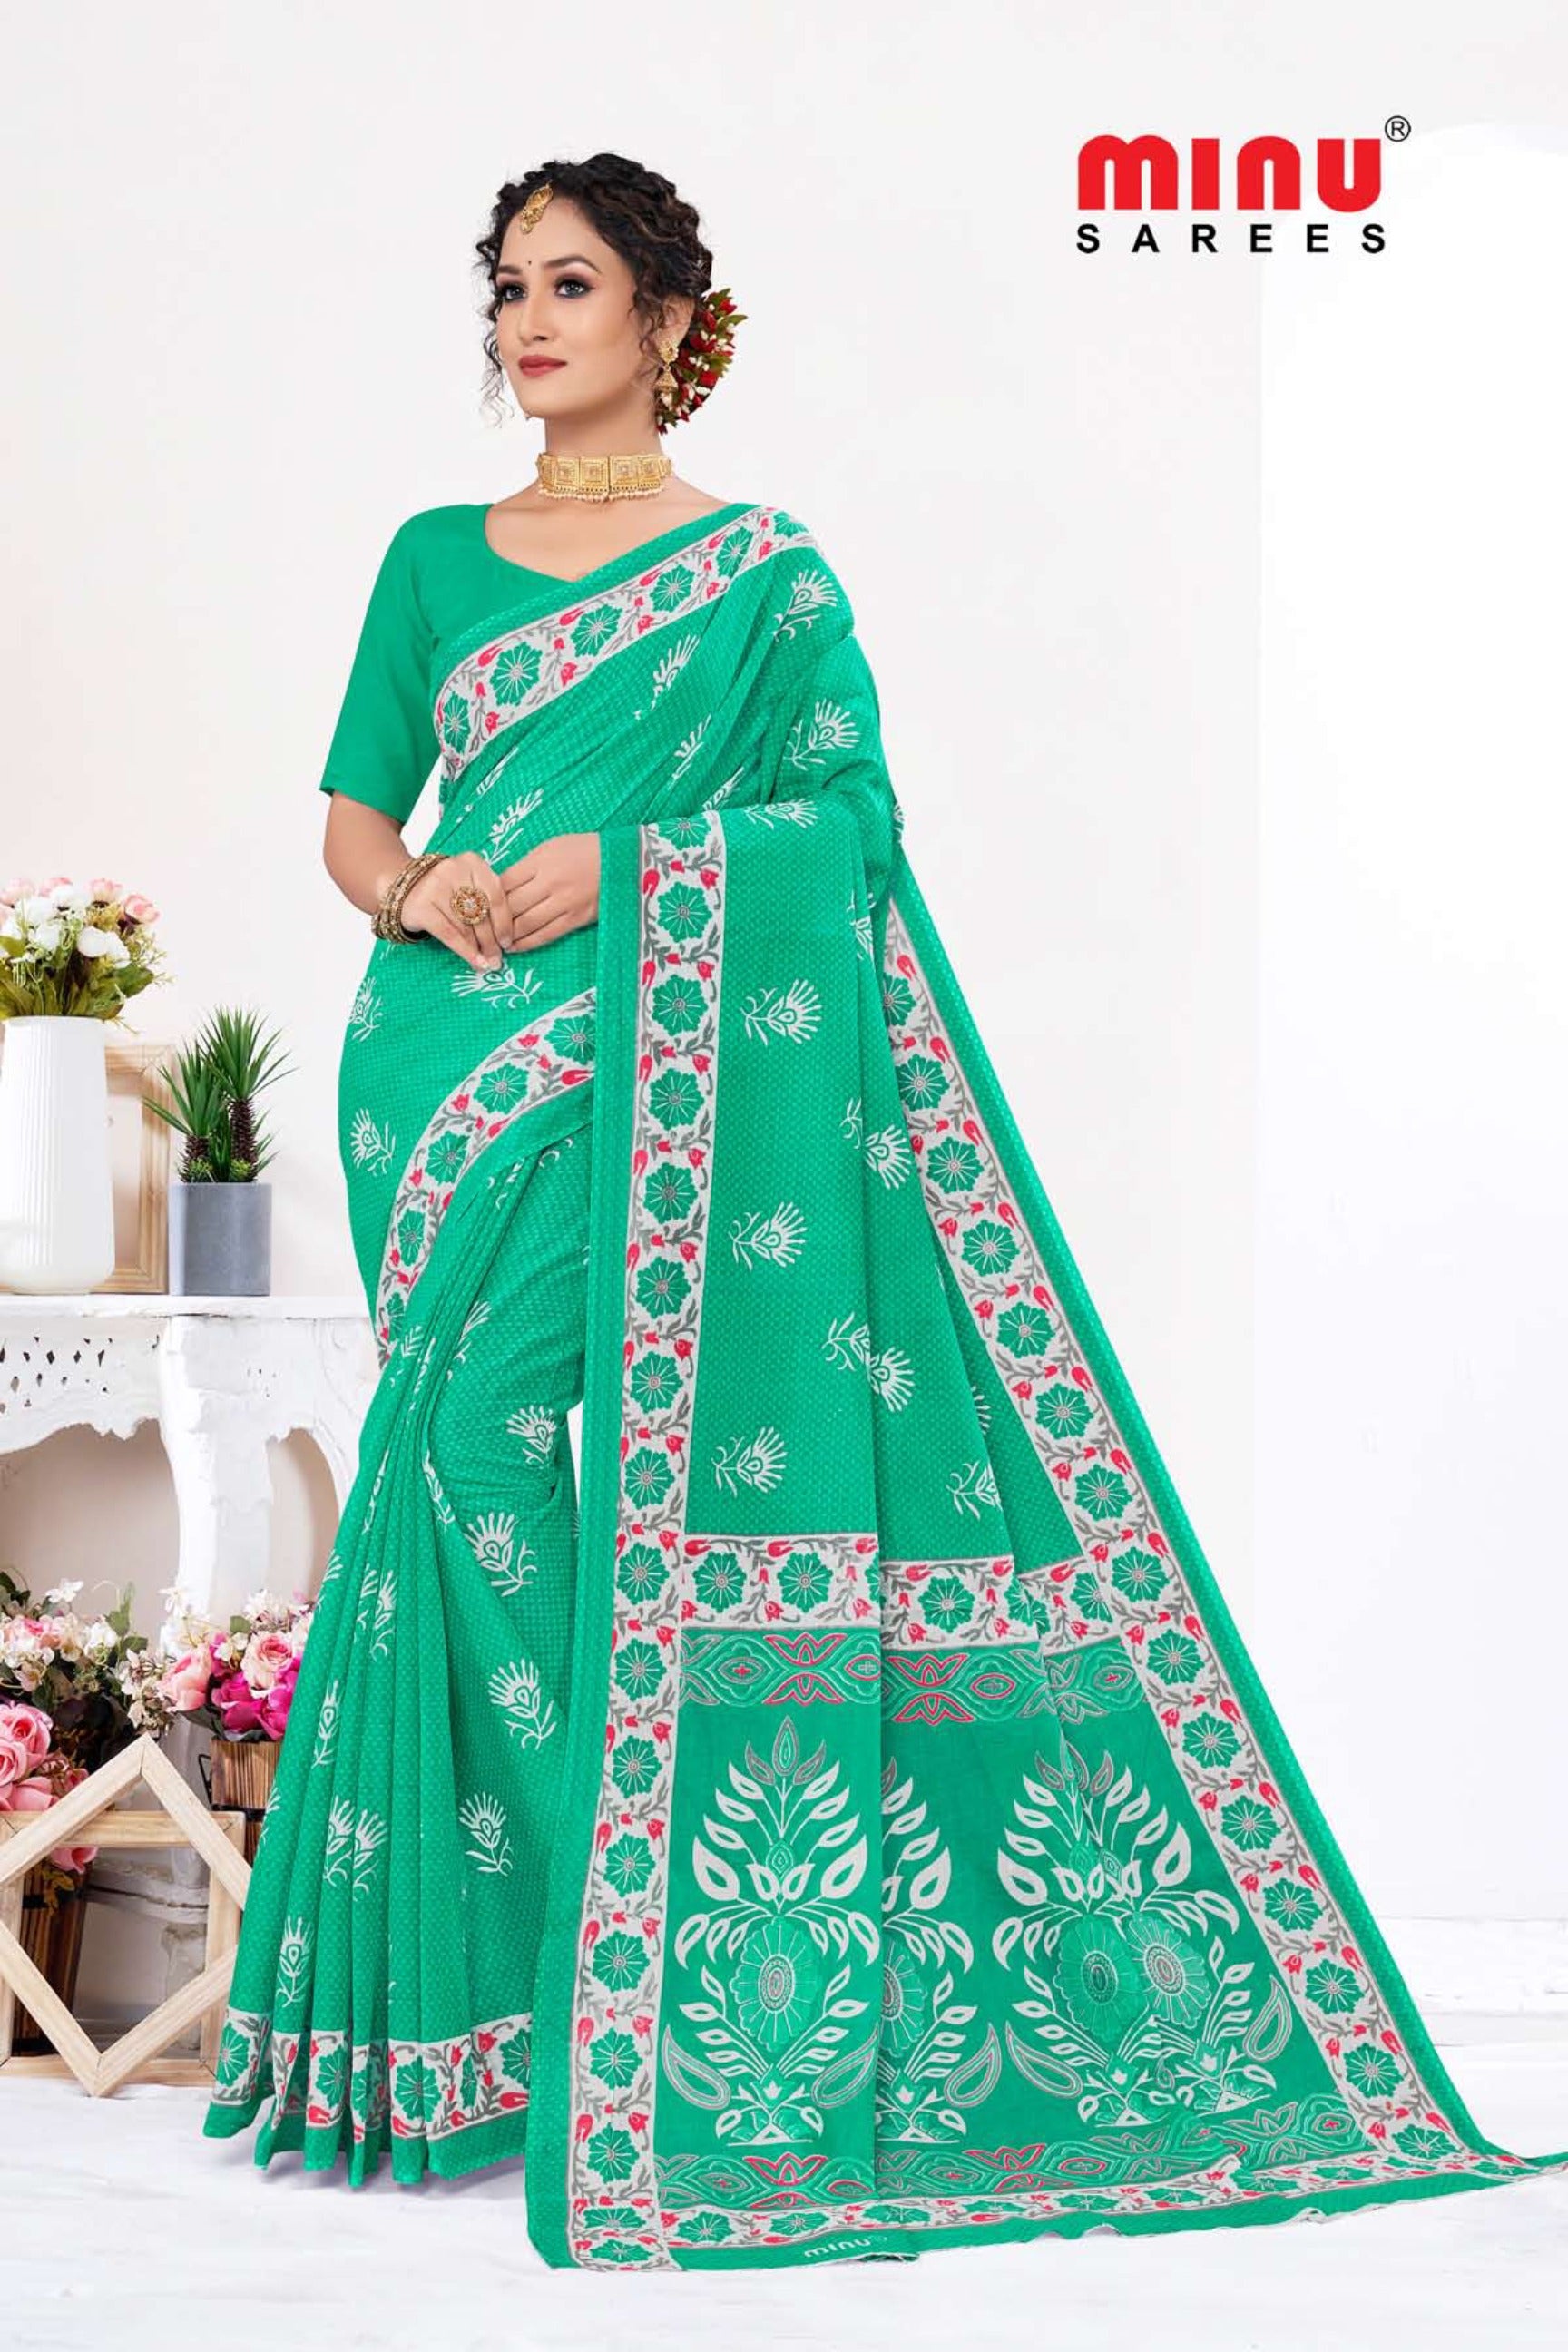 Tip-quality pure cotton saree wearing woman 